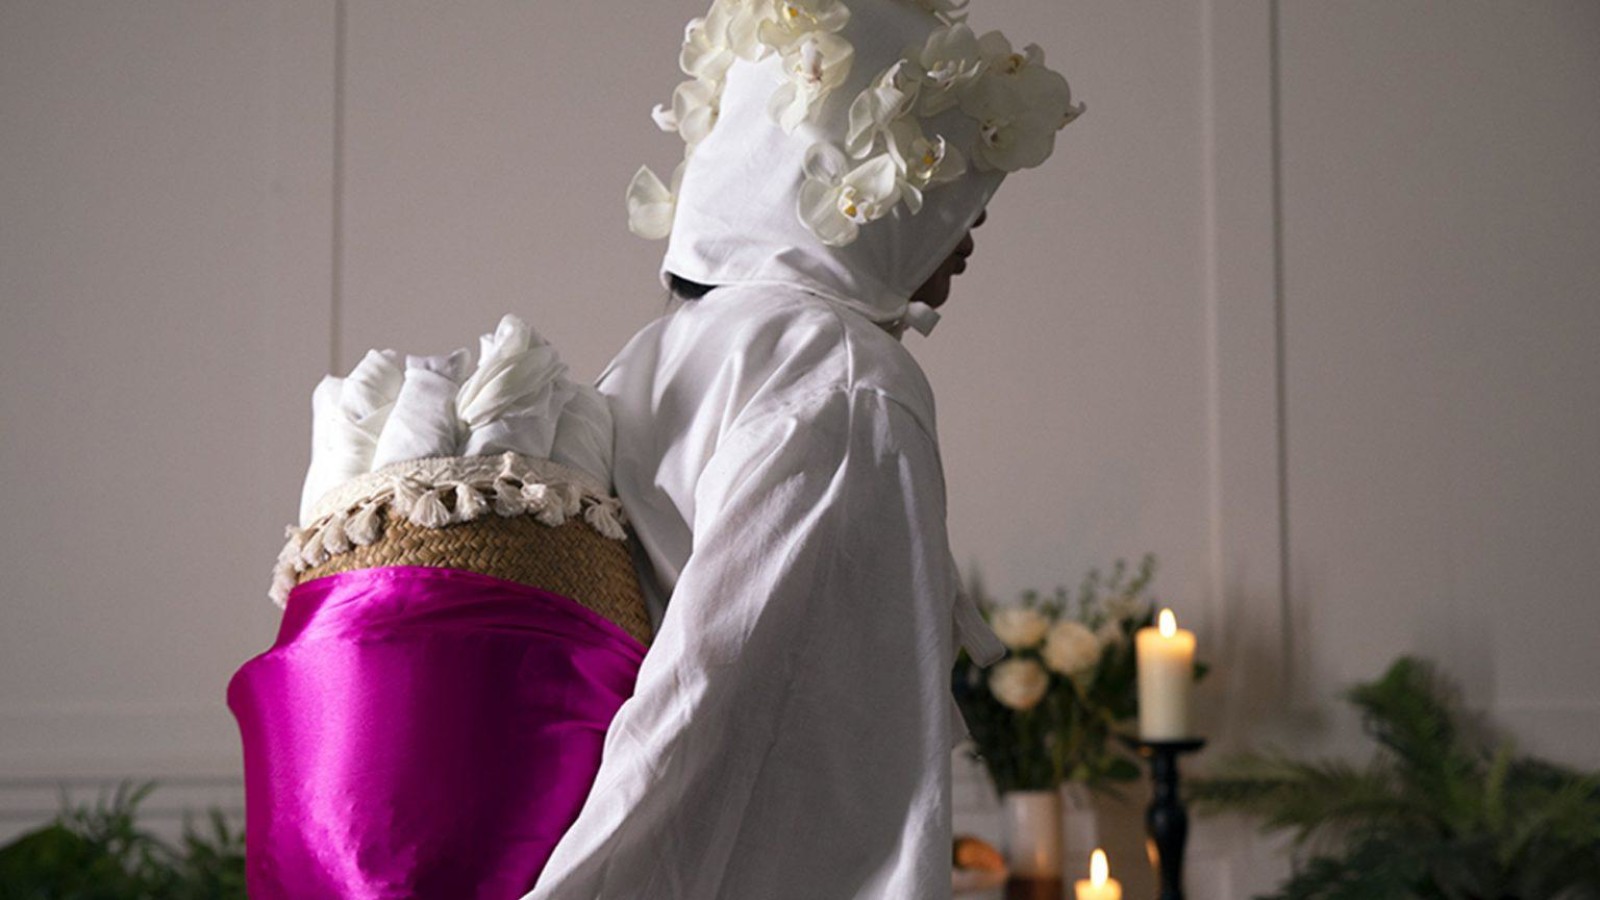 A person wearing a white cotton gown, with a white cotton hood adorned with white flowers carries a basket wrapped in pink satin fabric on their back. The basket is full of white fabric rolled up. Behind them a table with candles, a large fruit bowl and white flowers is set up like as altar.